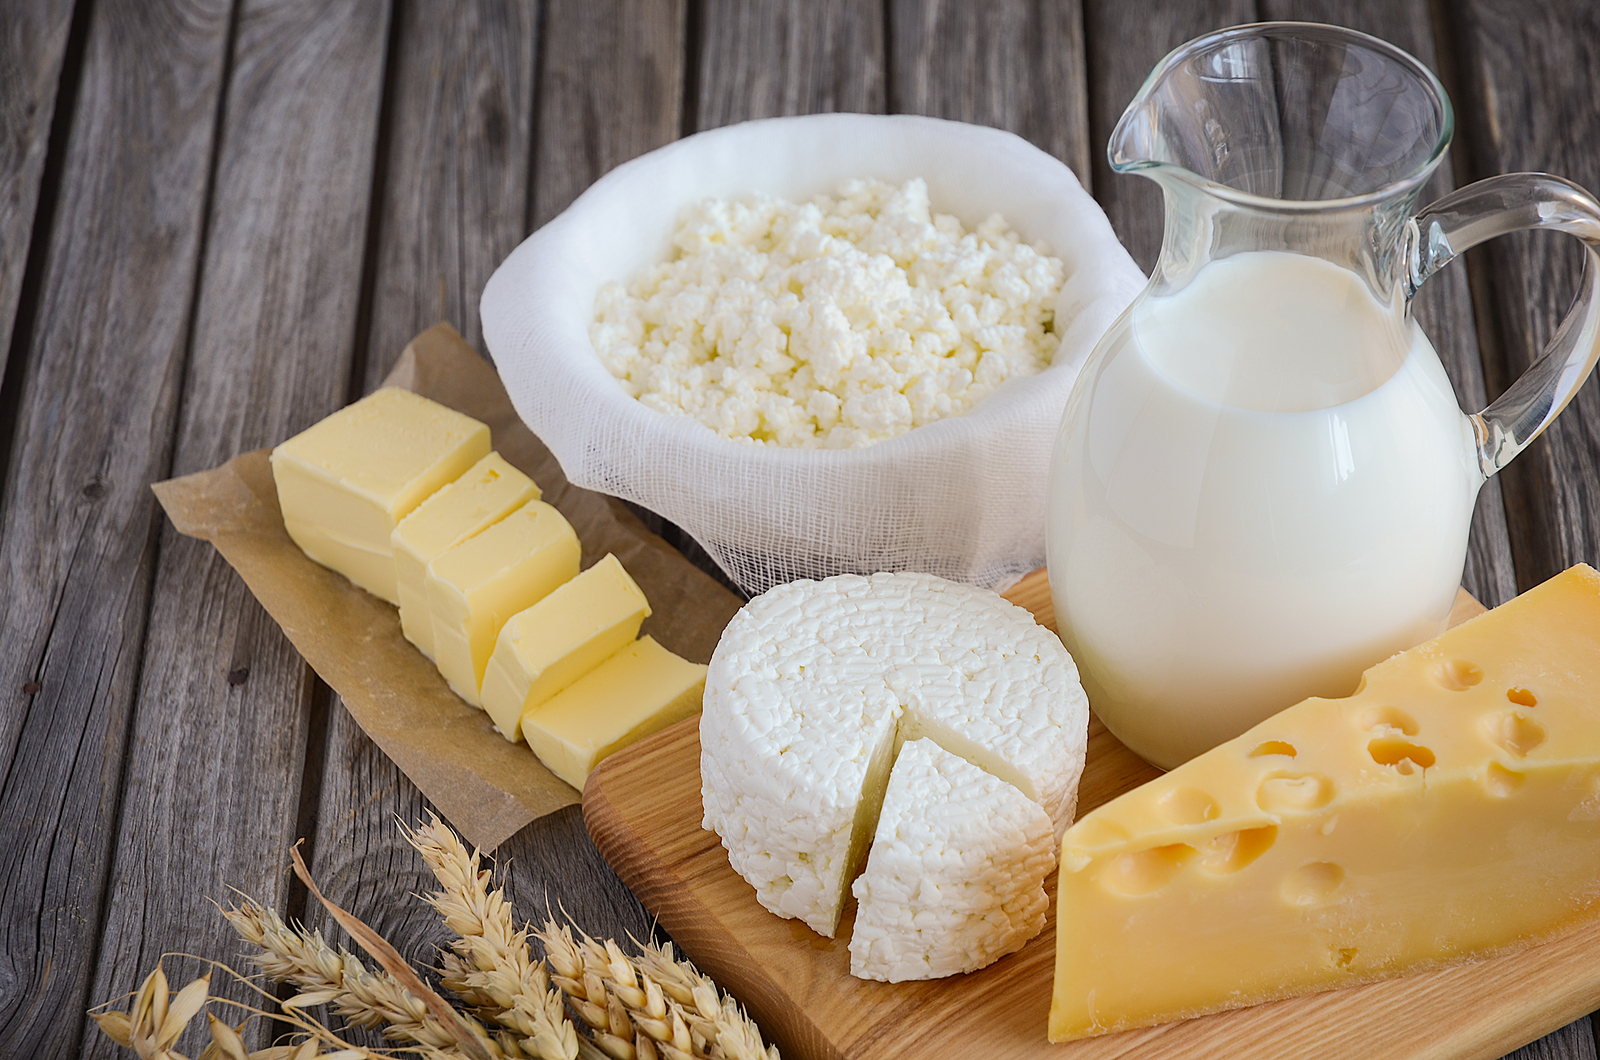 Dairy, like cheese and milk, are great pre-workout foods